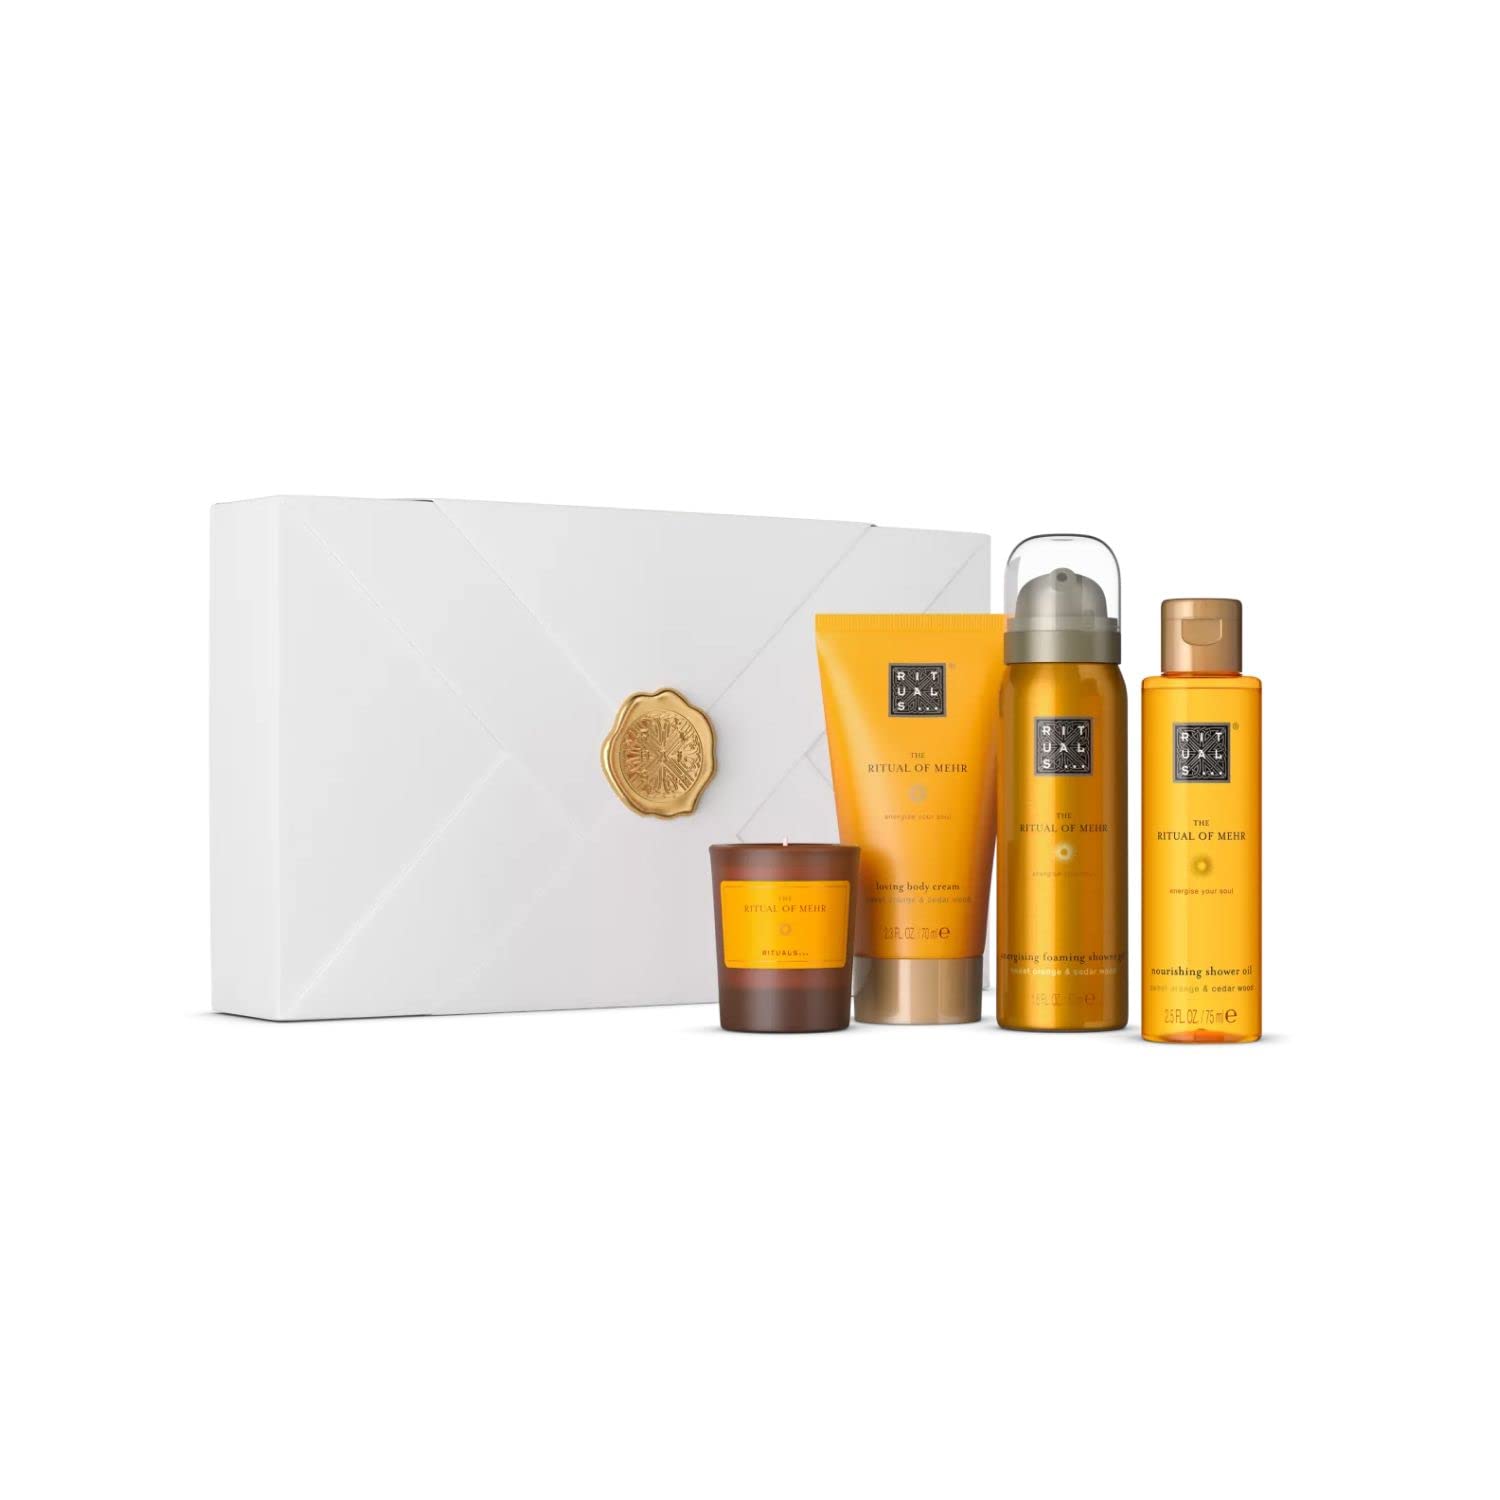 RITUALS The Ritual of More Gift Set, S - Gift Box with 4 Personal Care Products with Sweet Orange and Cedar Wood - Stimulating Fragrance